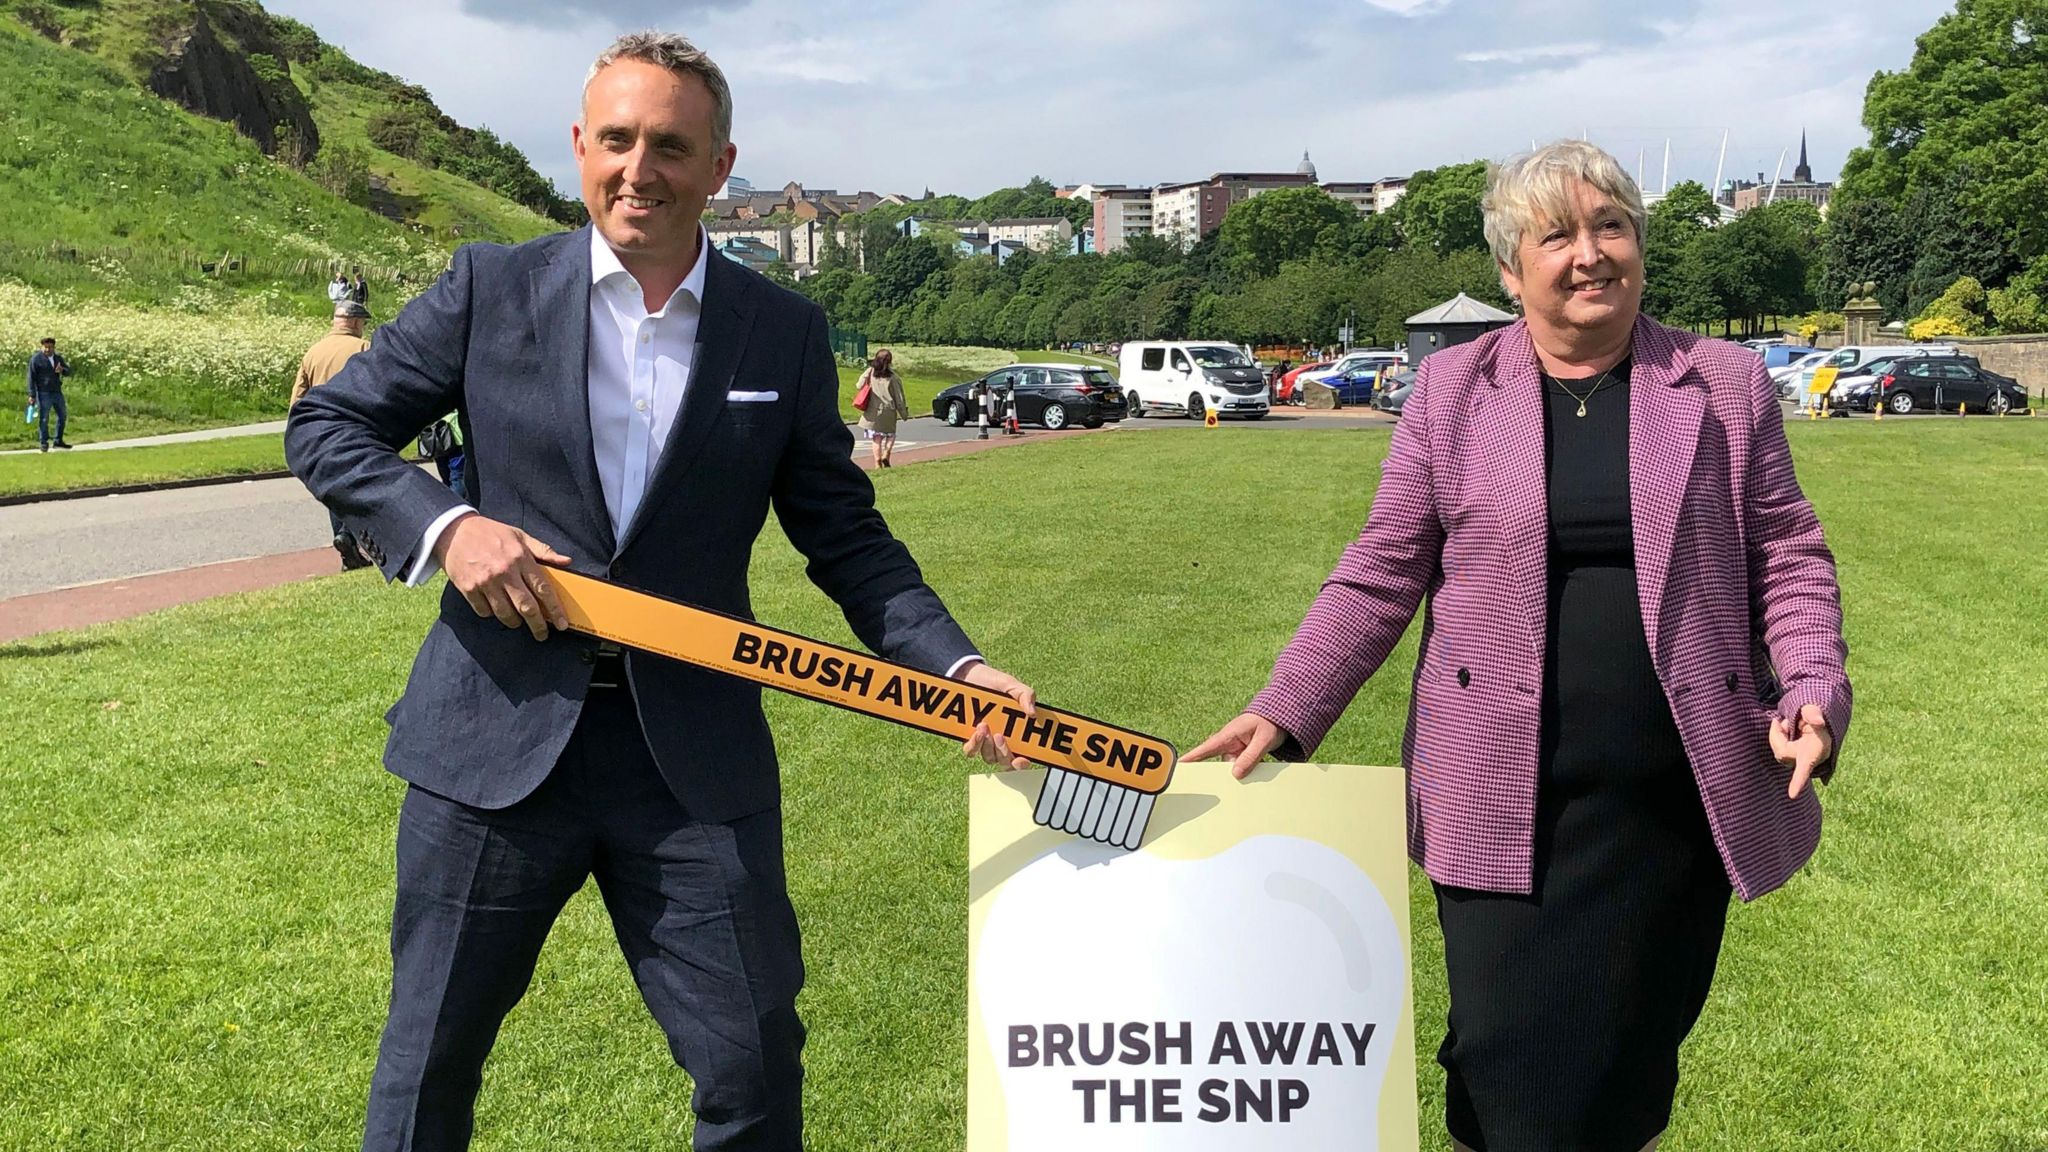 Alex-Cole Hamilton holding a big toothbrush with "brush away the SNP" on it